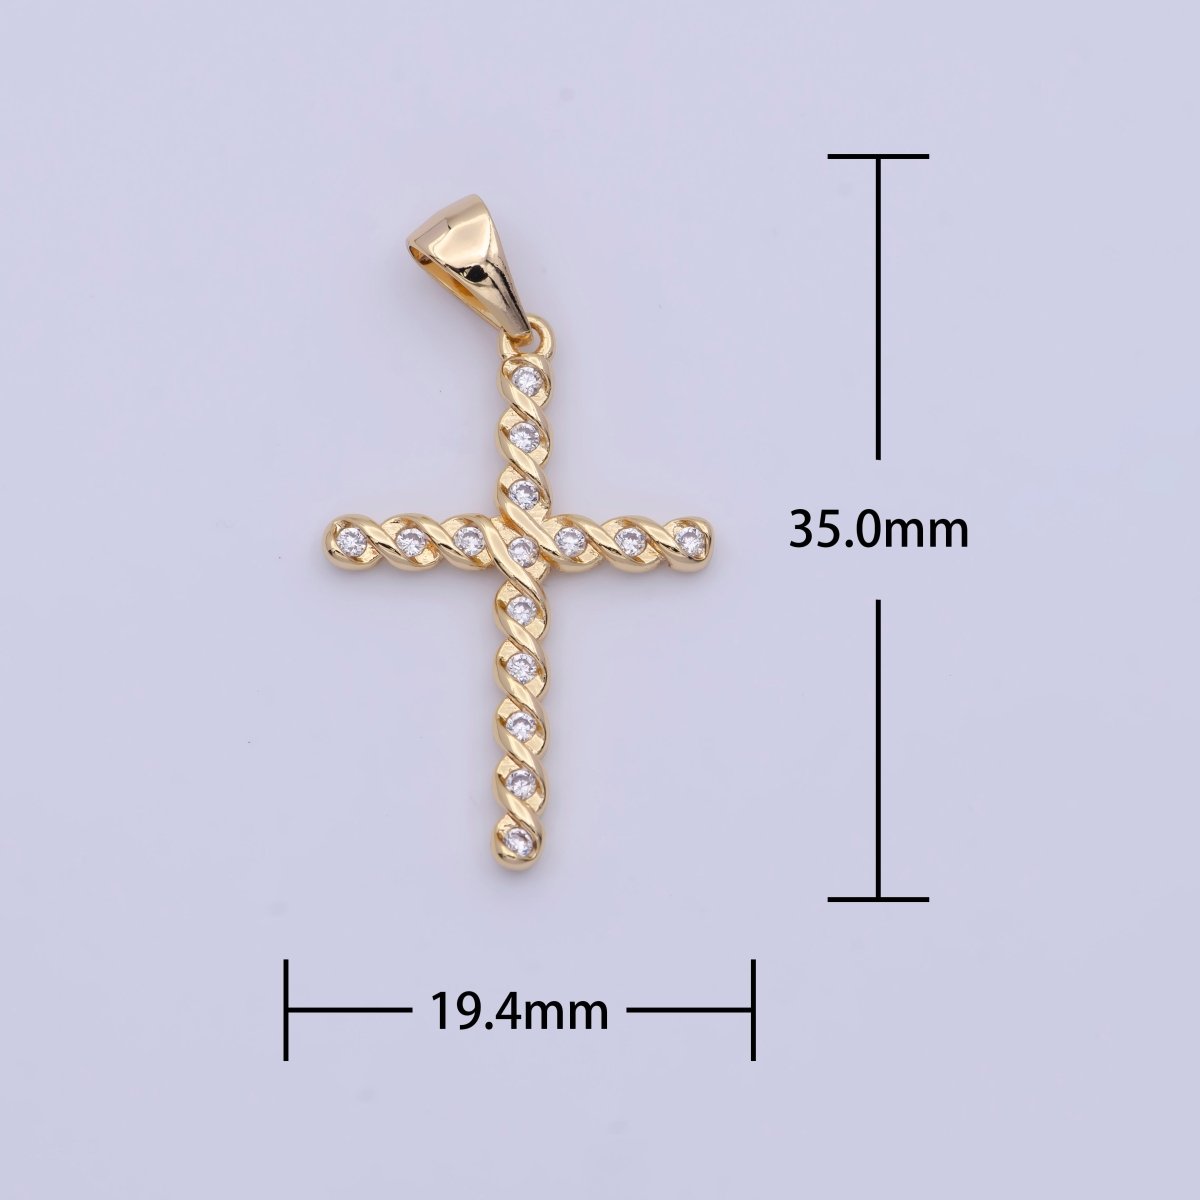 Gold Twisted Cross Round Cubic Zirconia Pendant For Religious Jewelry Making | X-498 - DLUXCA